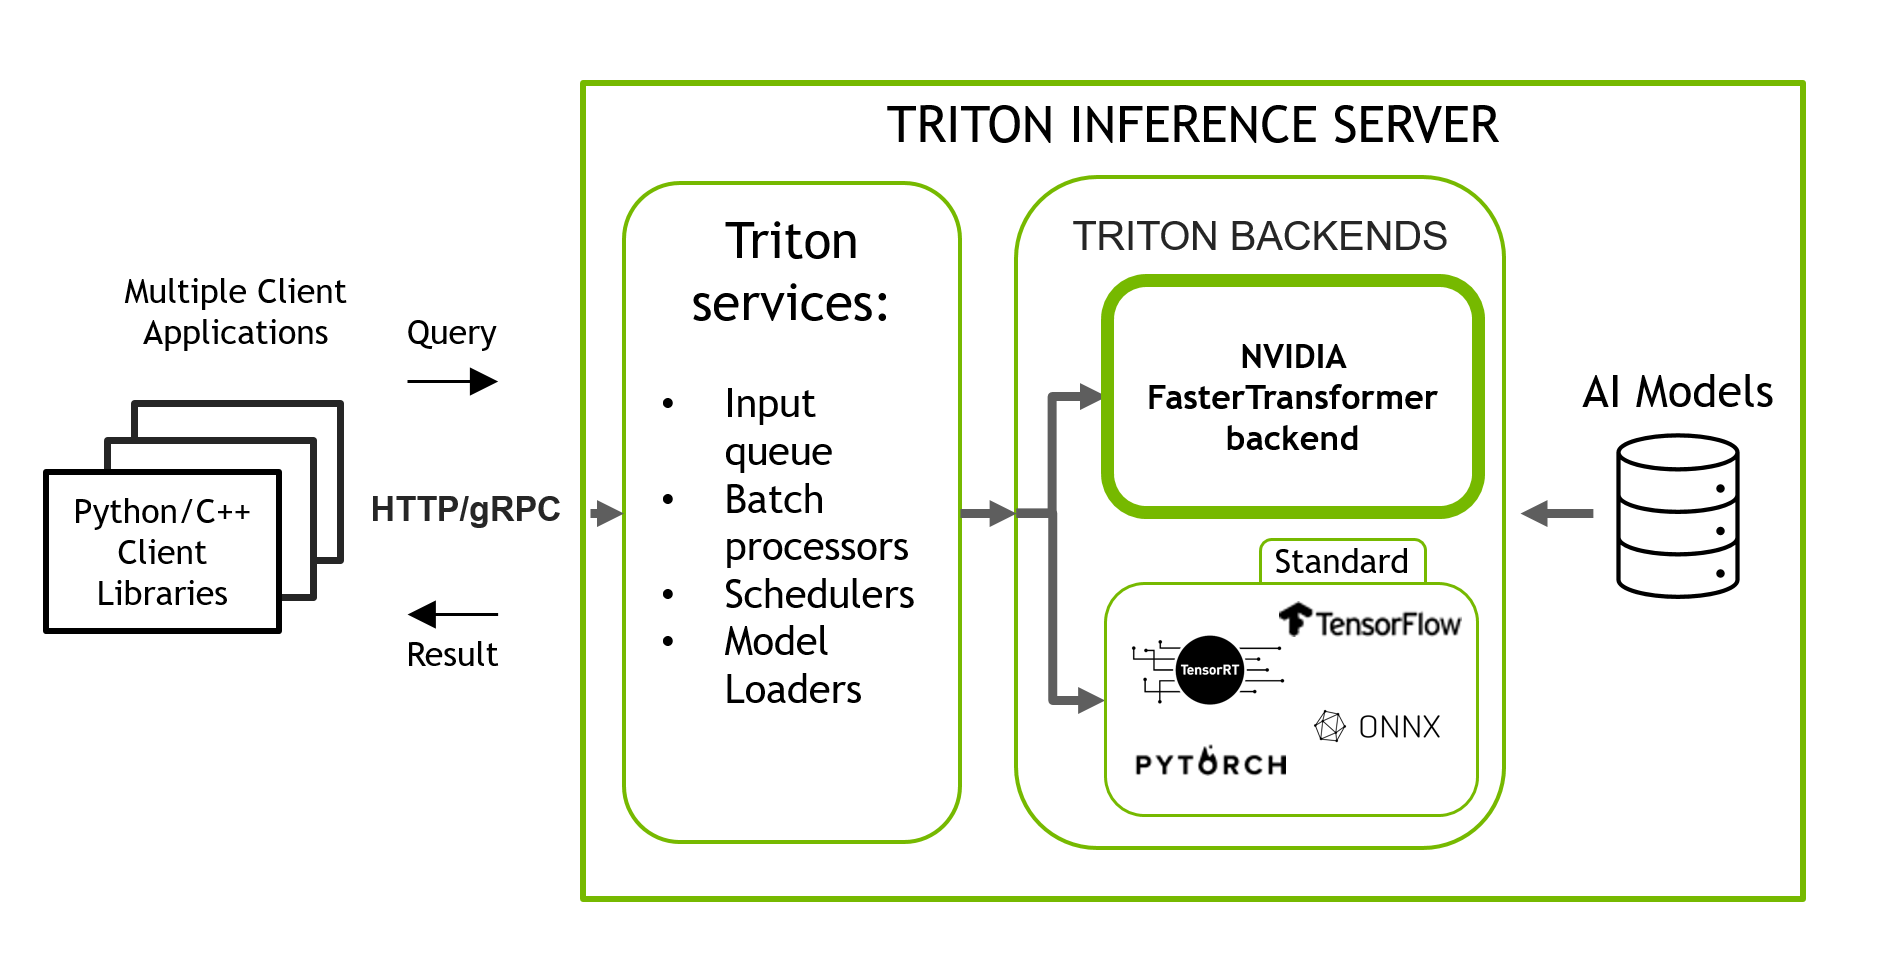 Graphic showing Triton inference server with multiple backends for inference of model trained with different frameworks